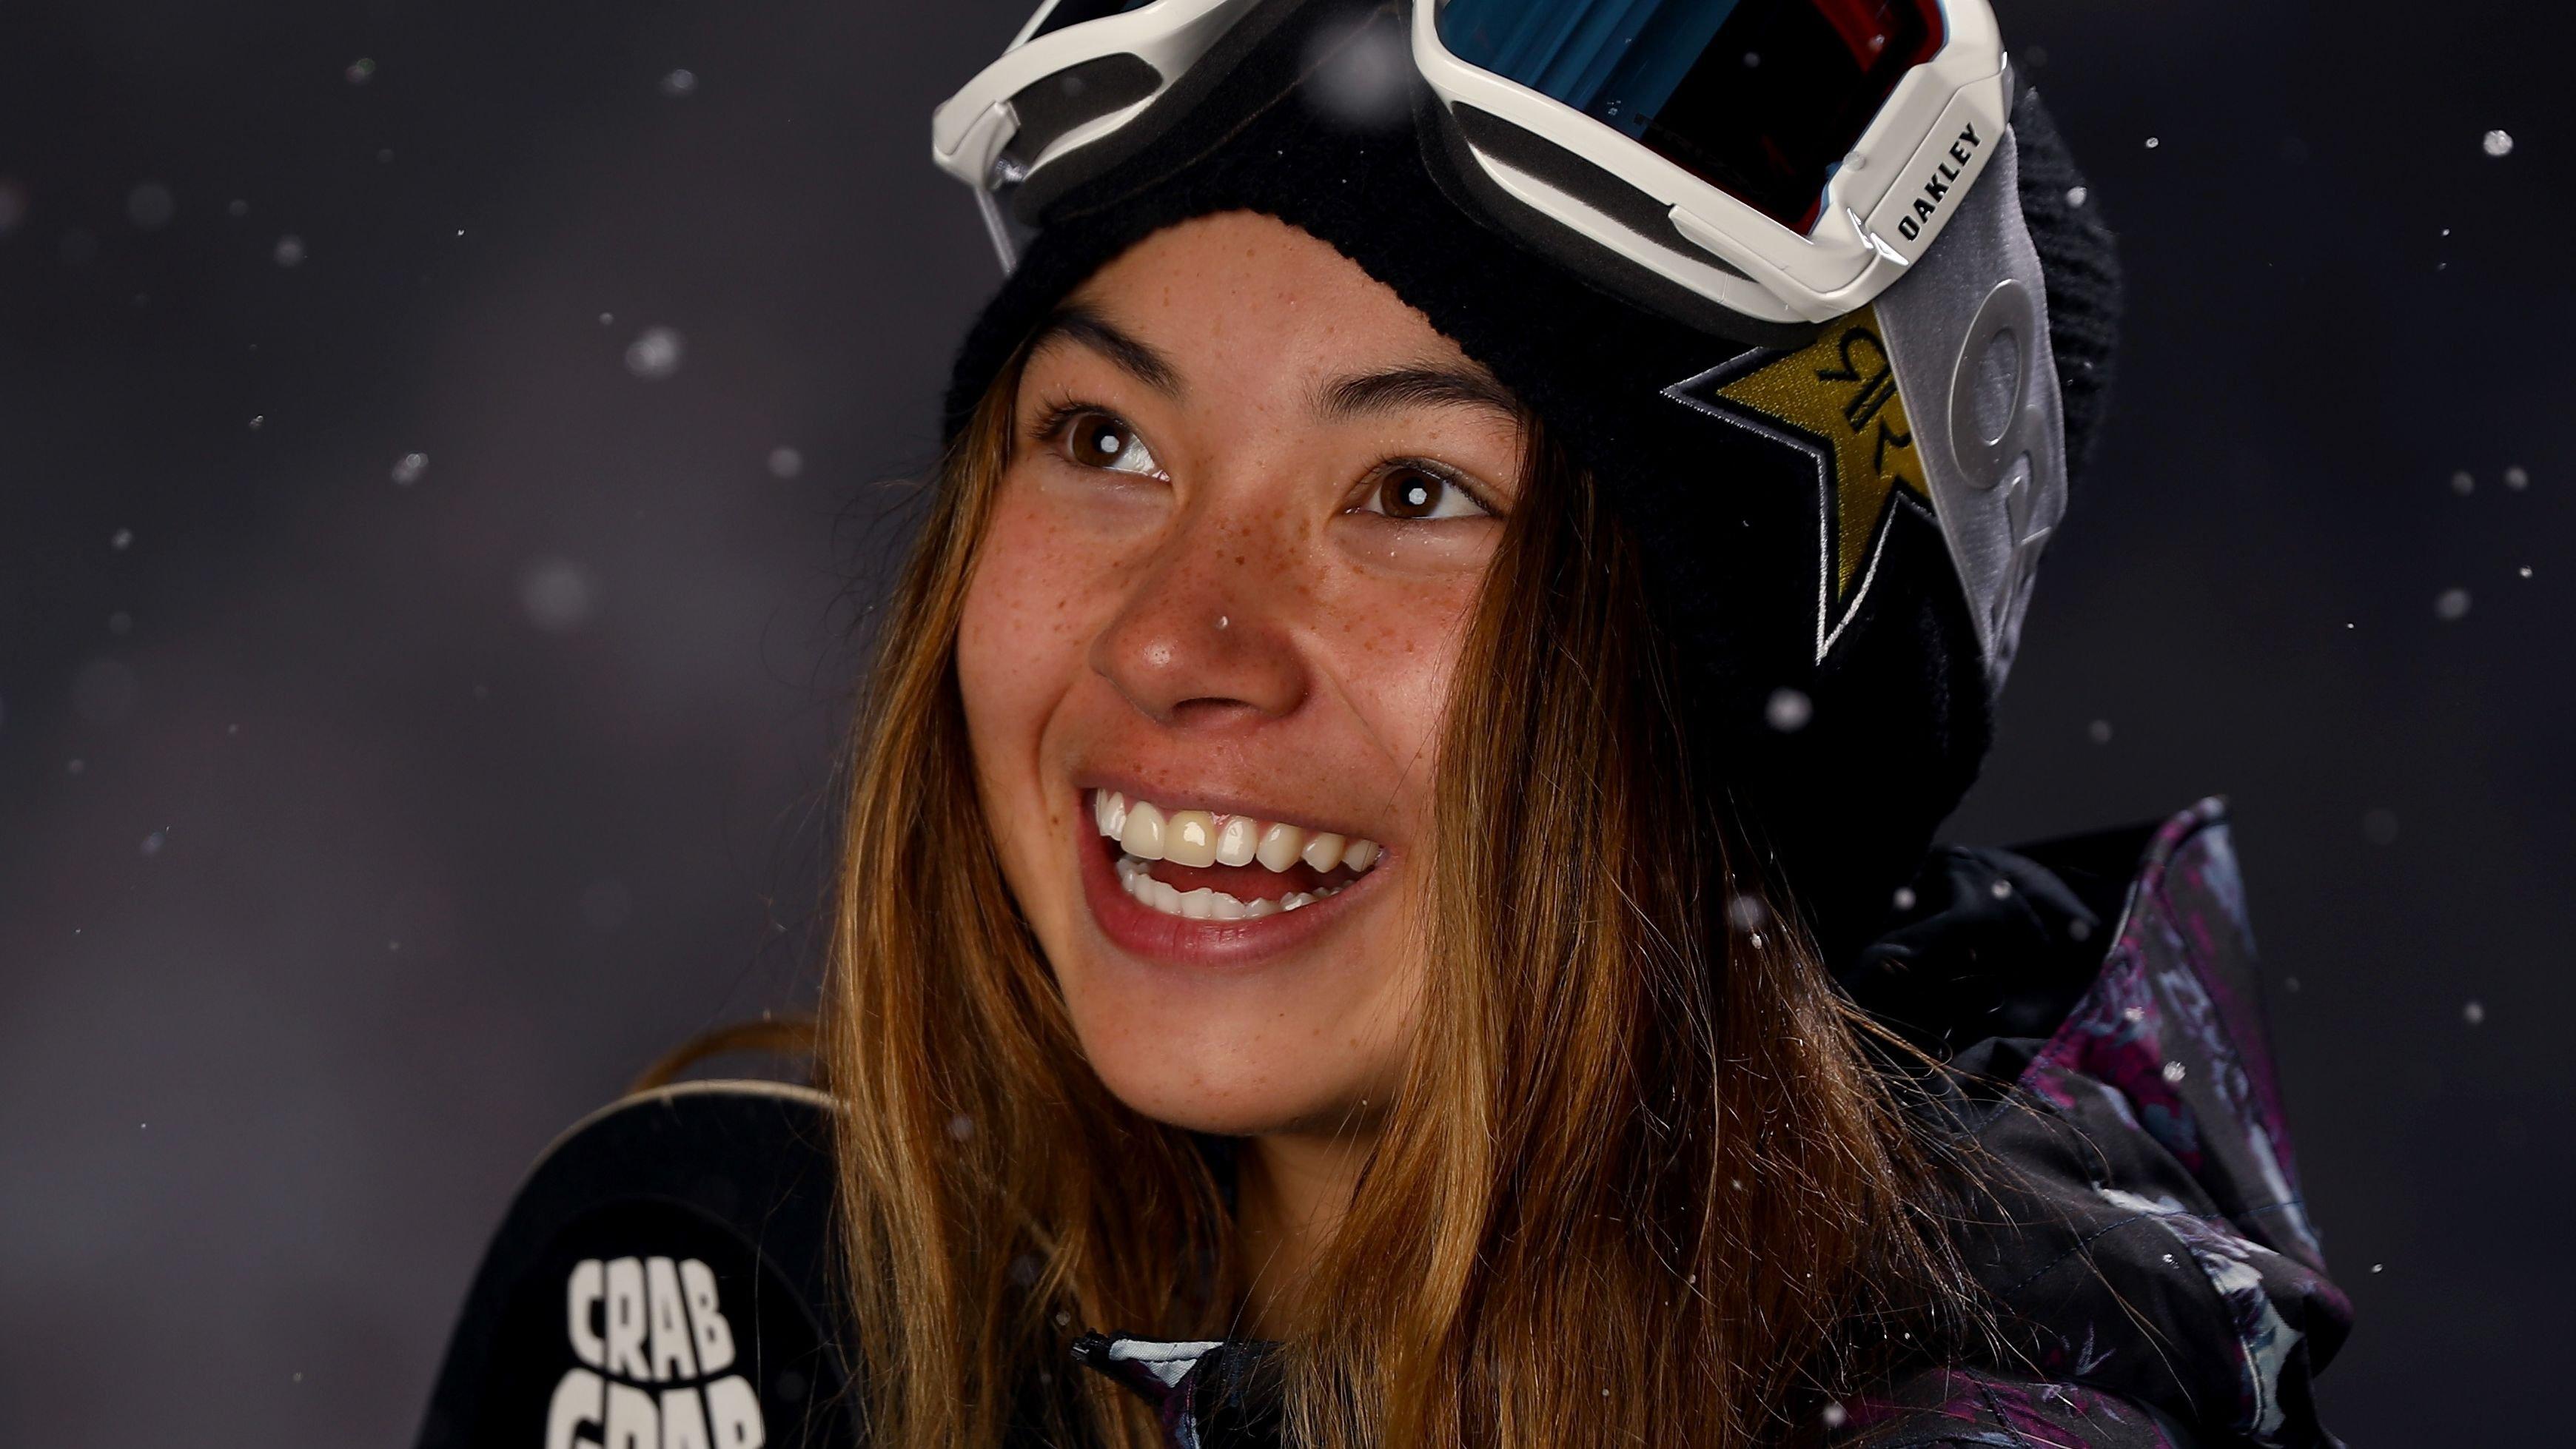 Hailey Langland wearing ski gear and smiling.